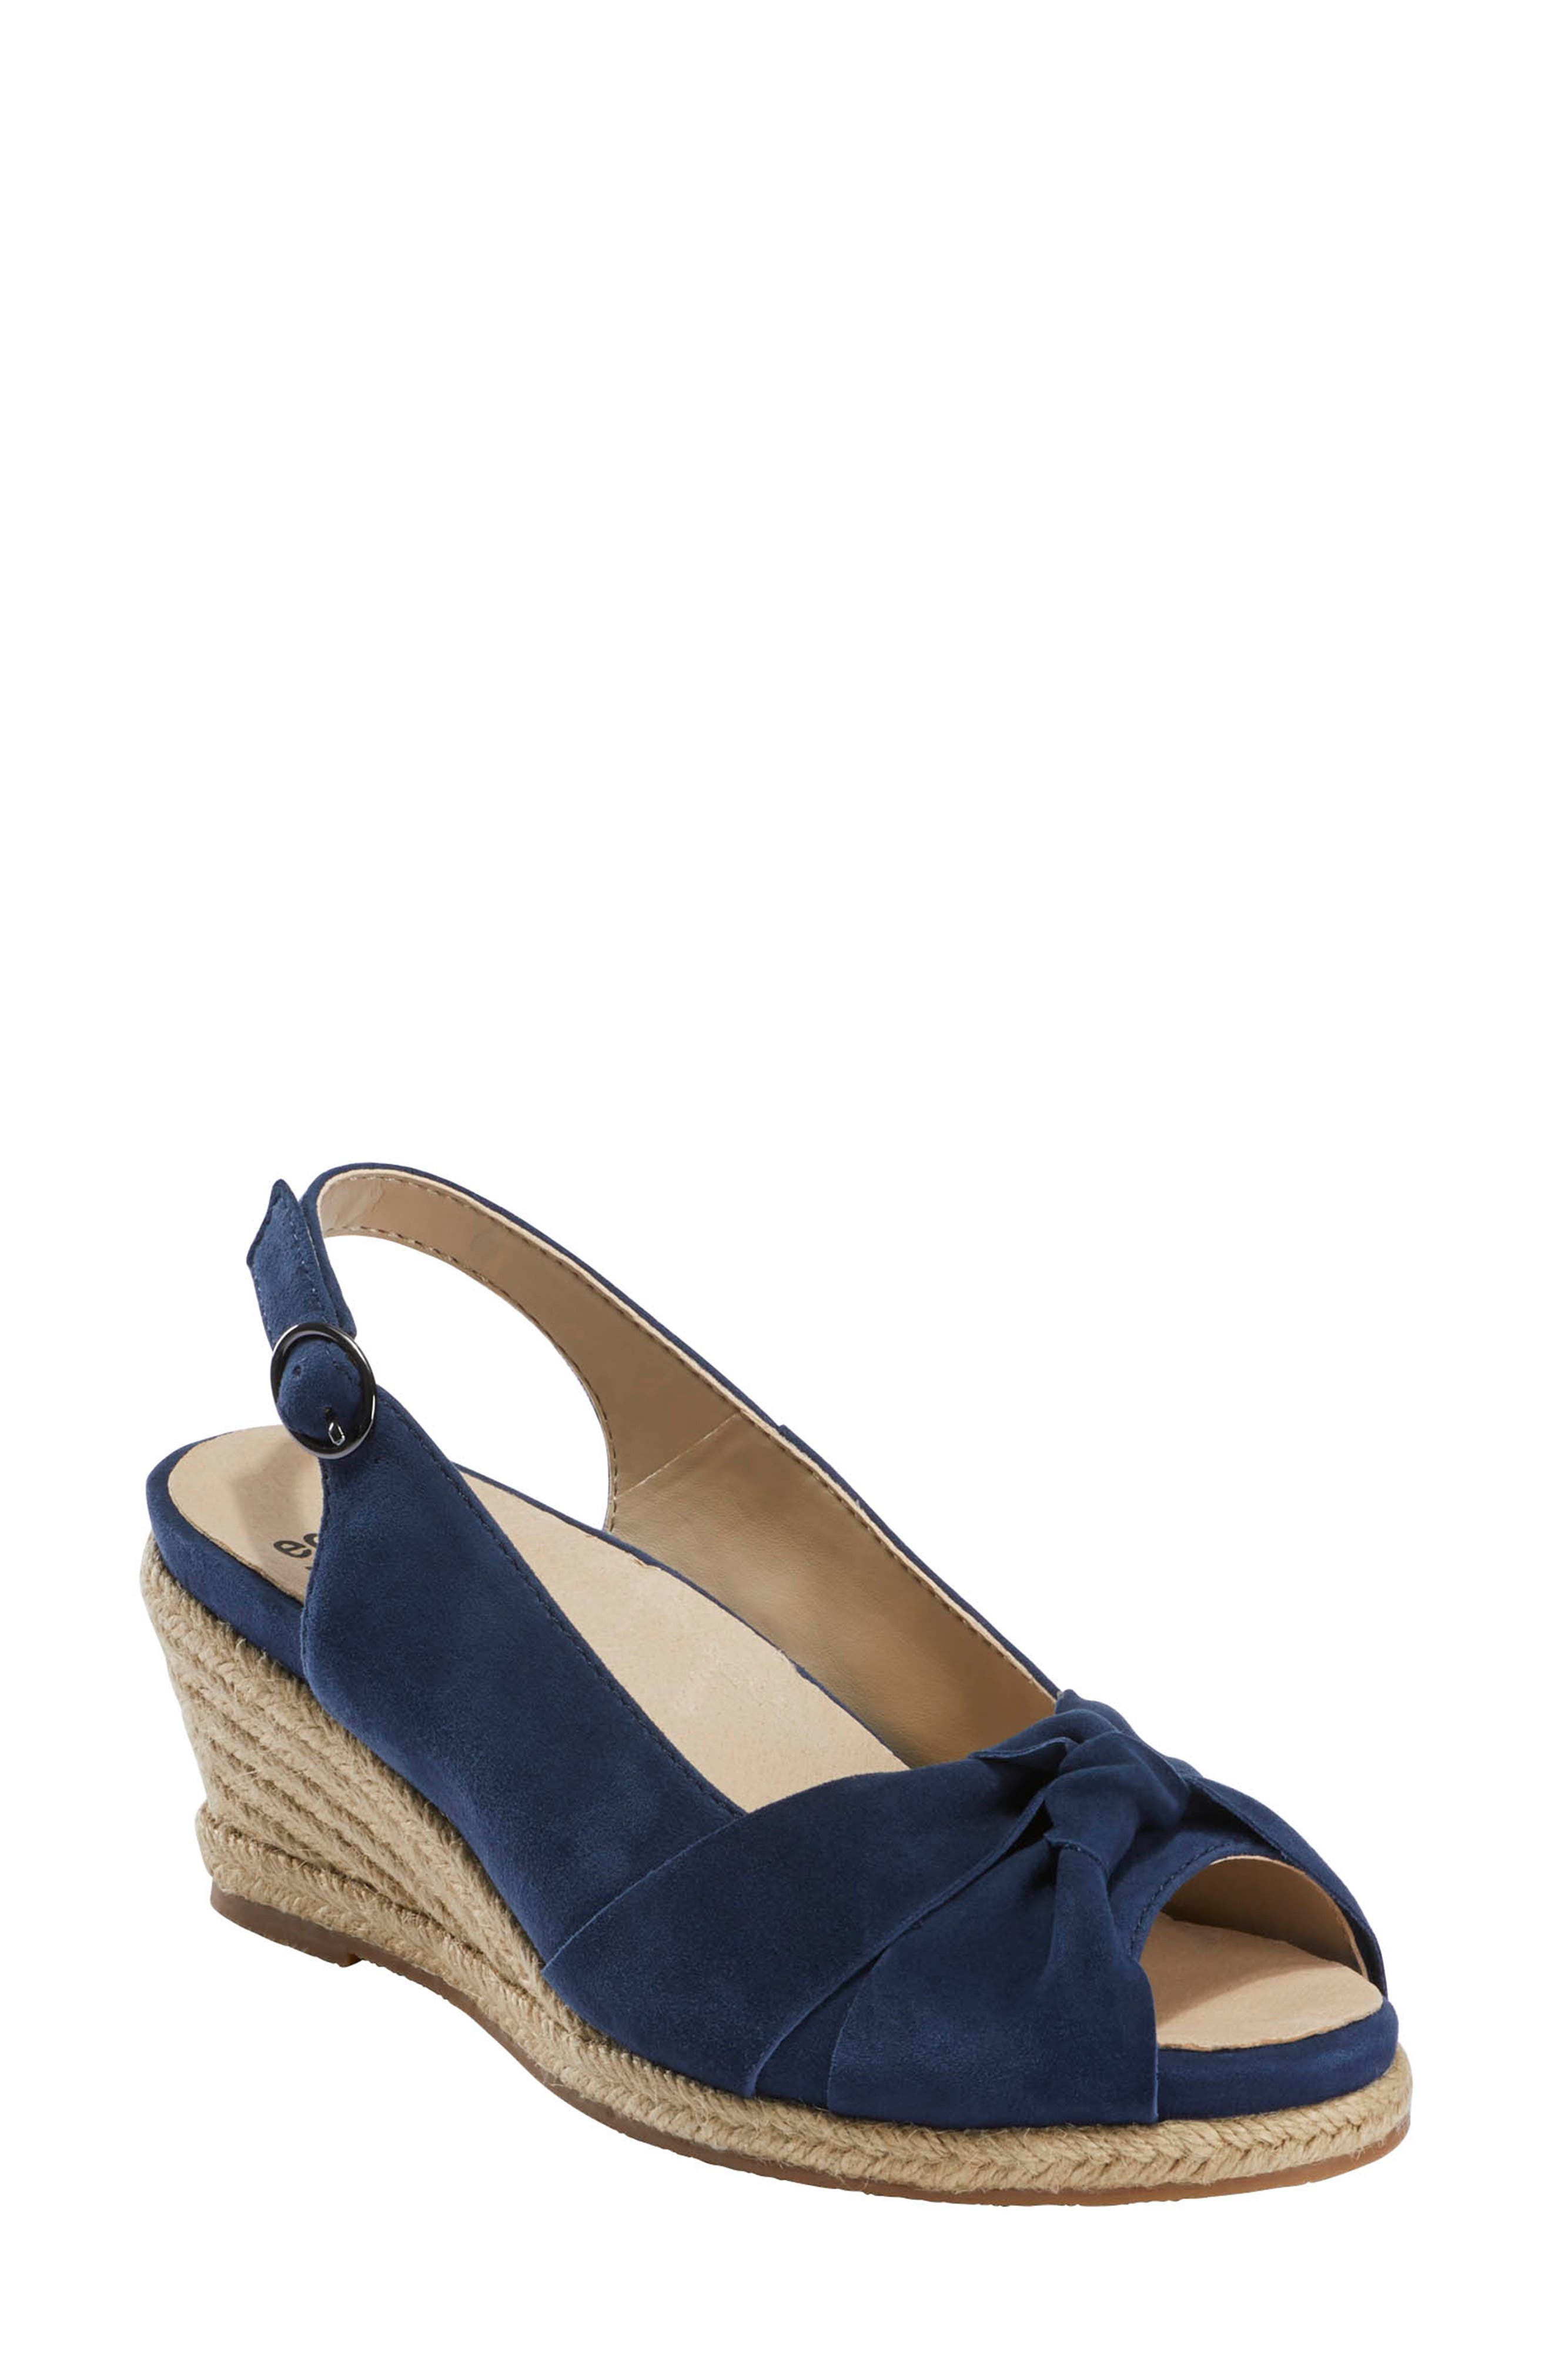 navy blue closed toe wedges